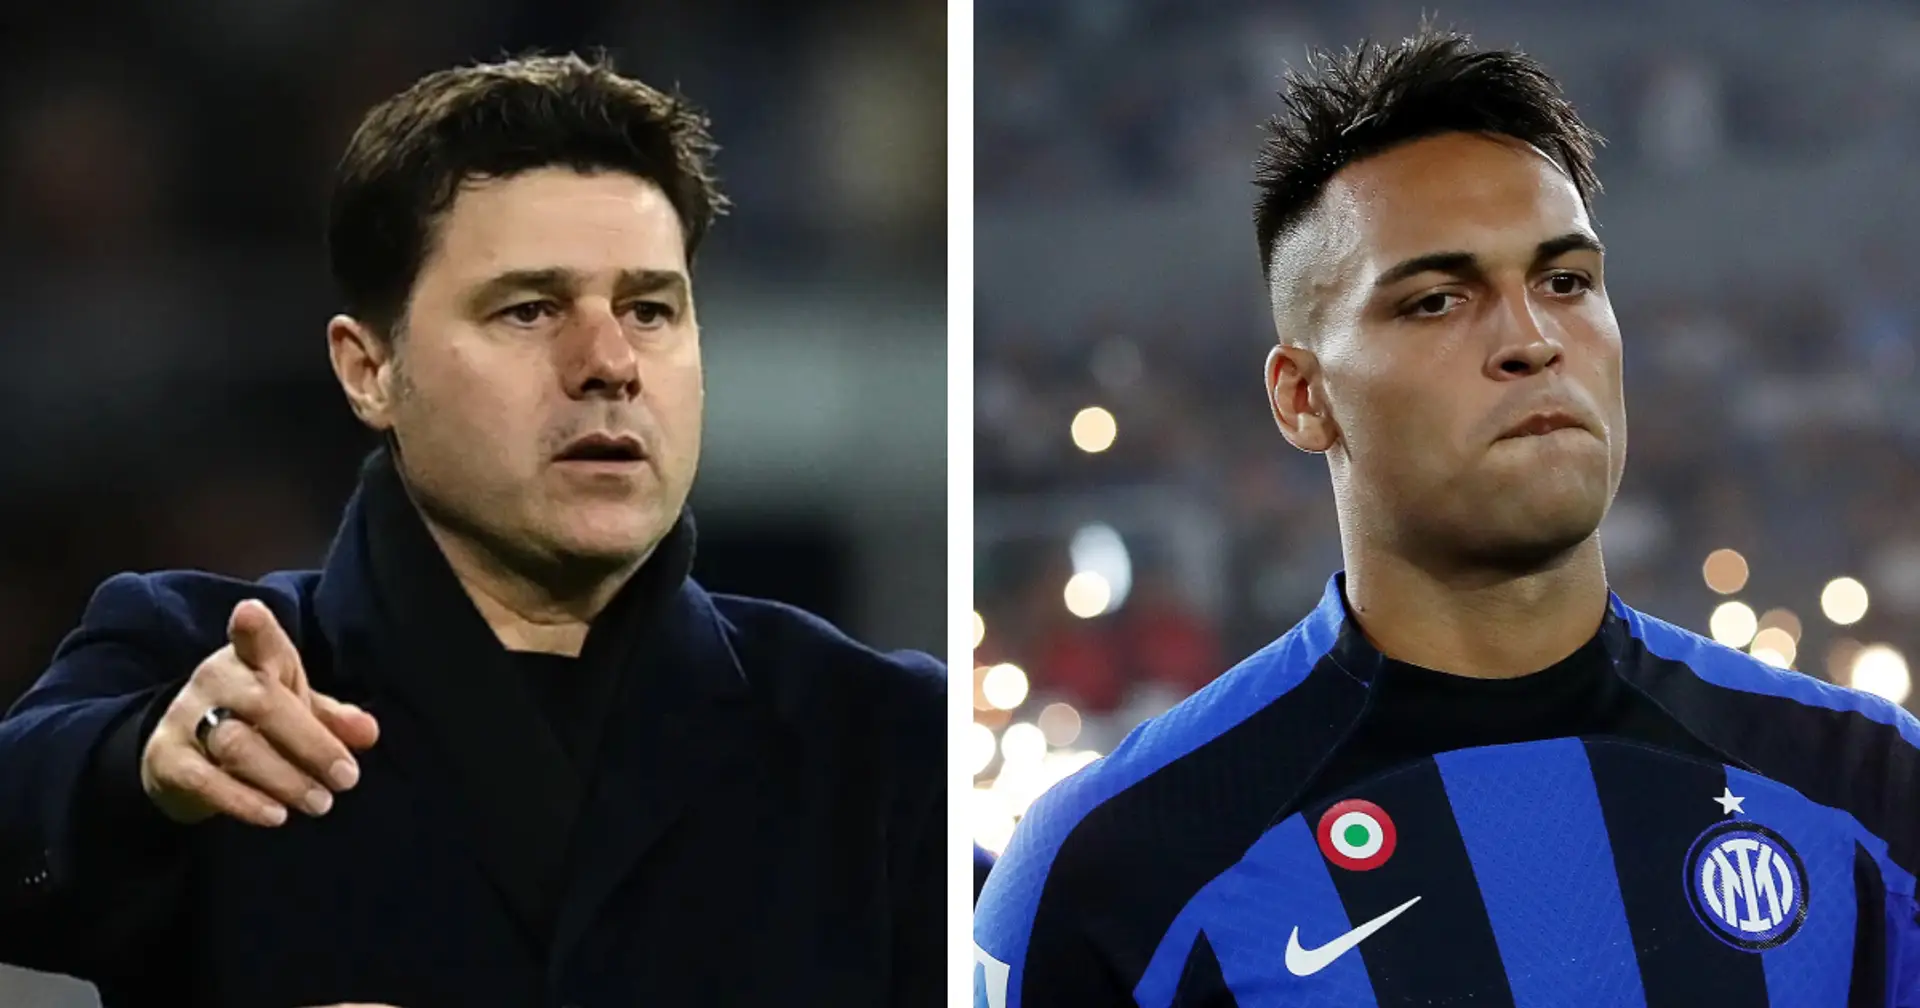 Chelsea fans want one Inter player after Champions League final - not Lautaro Martinez